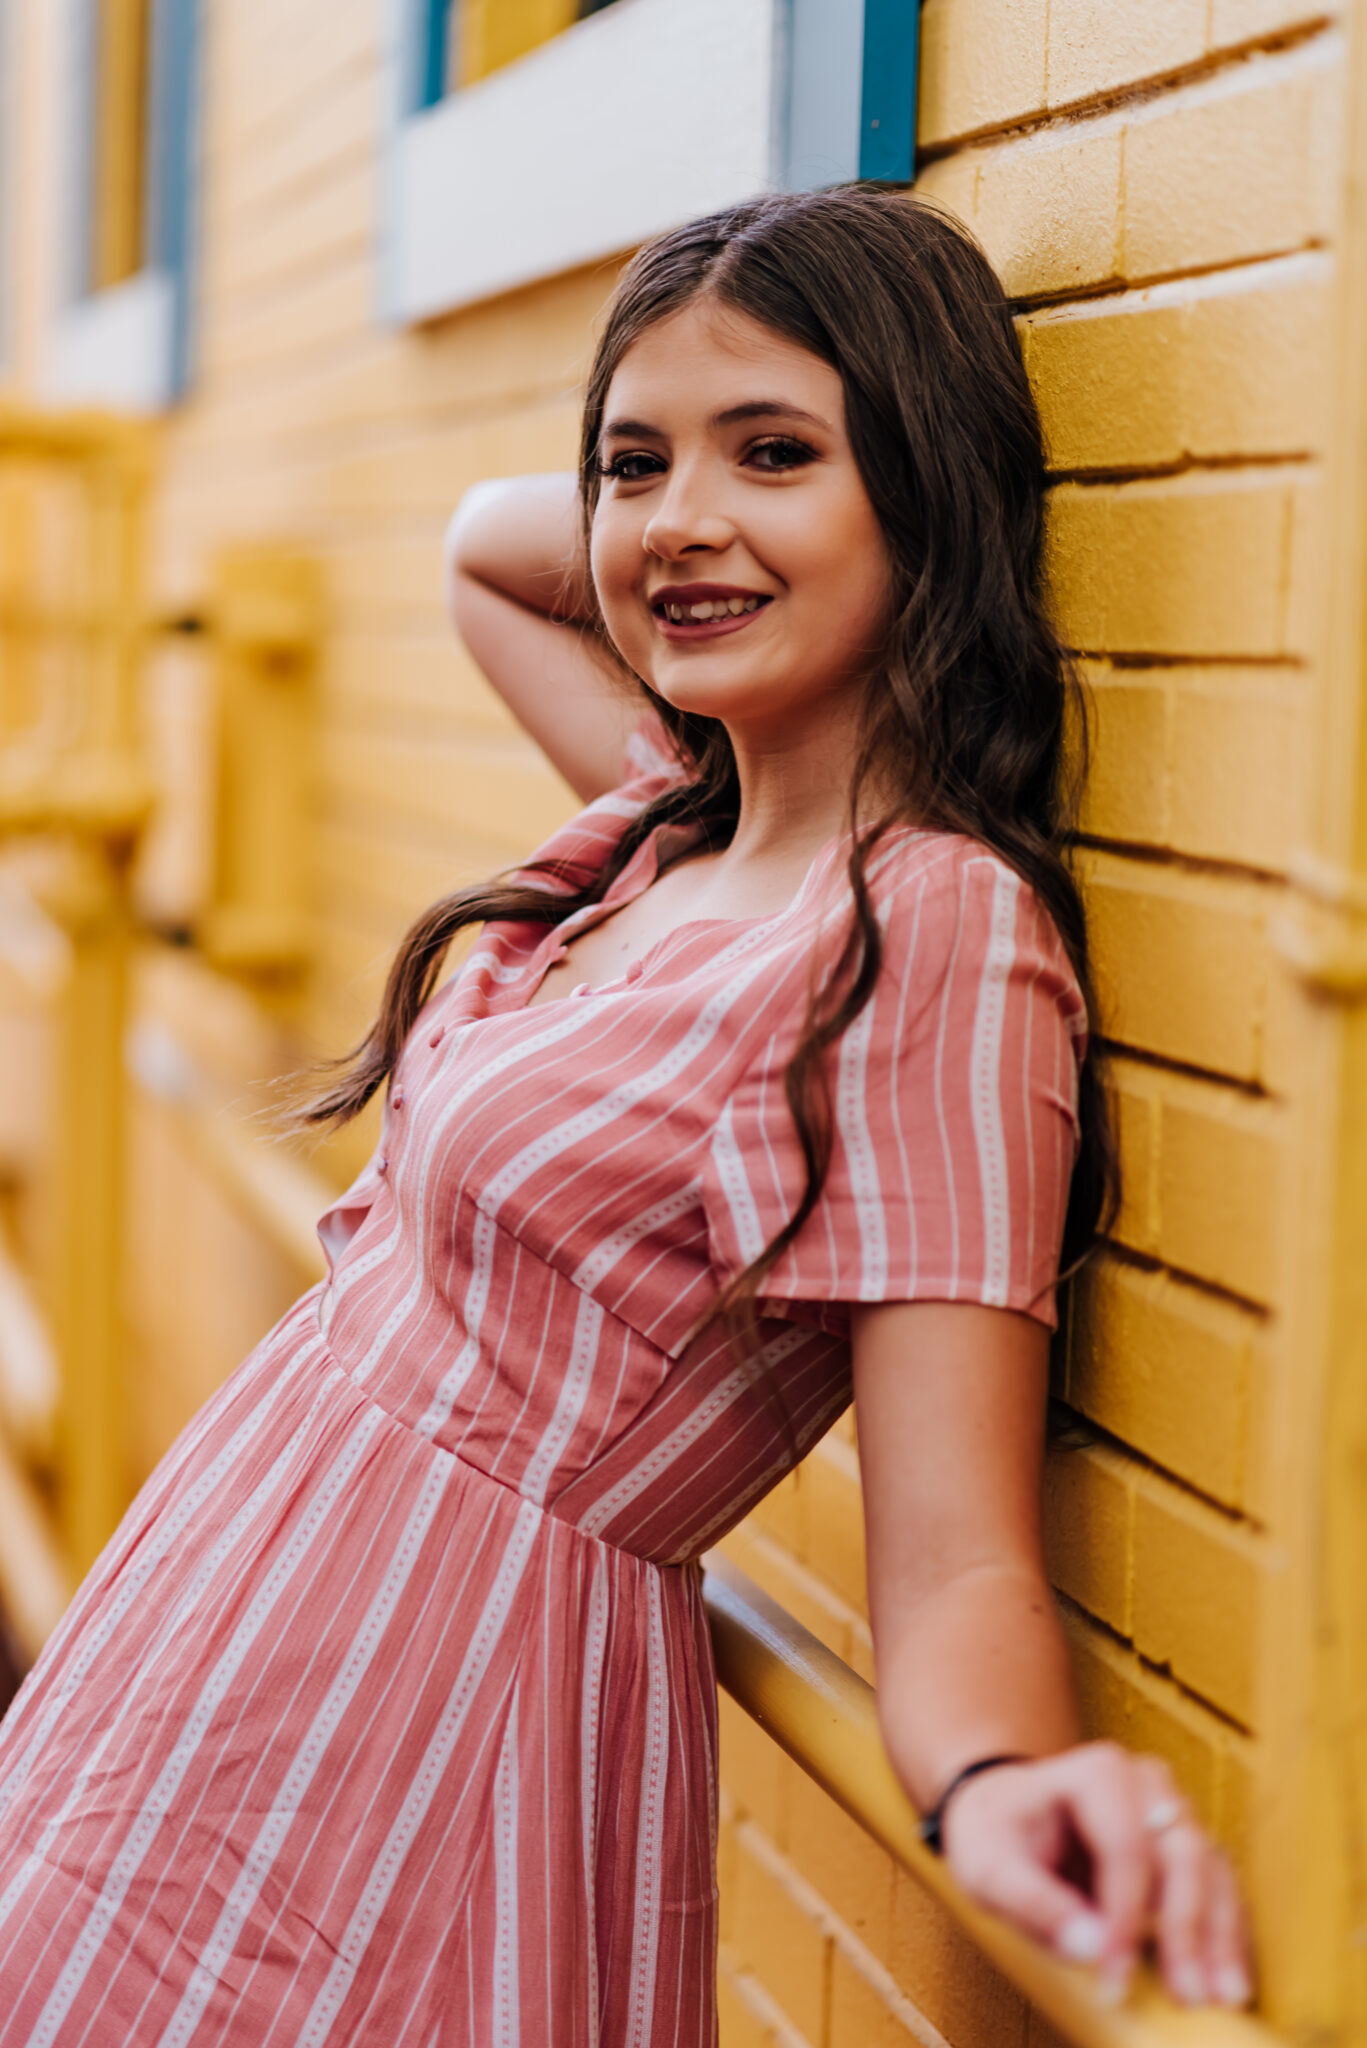 A girl in a pink dress poses against a bright yellow wall